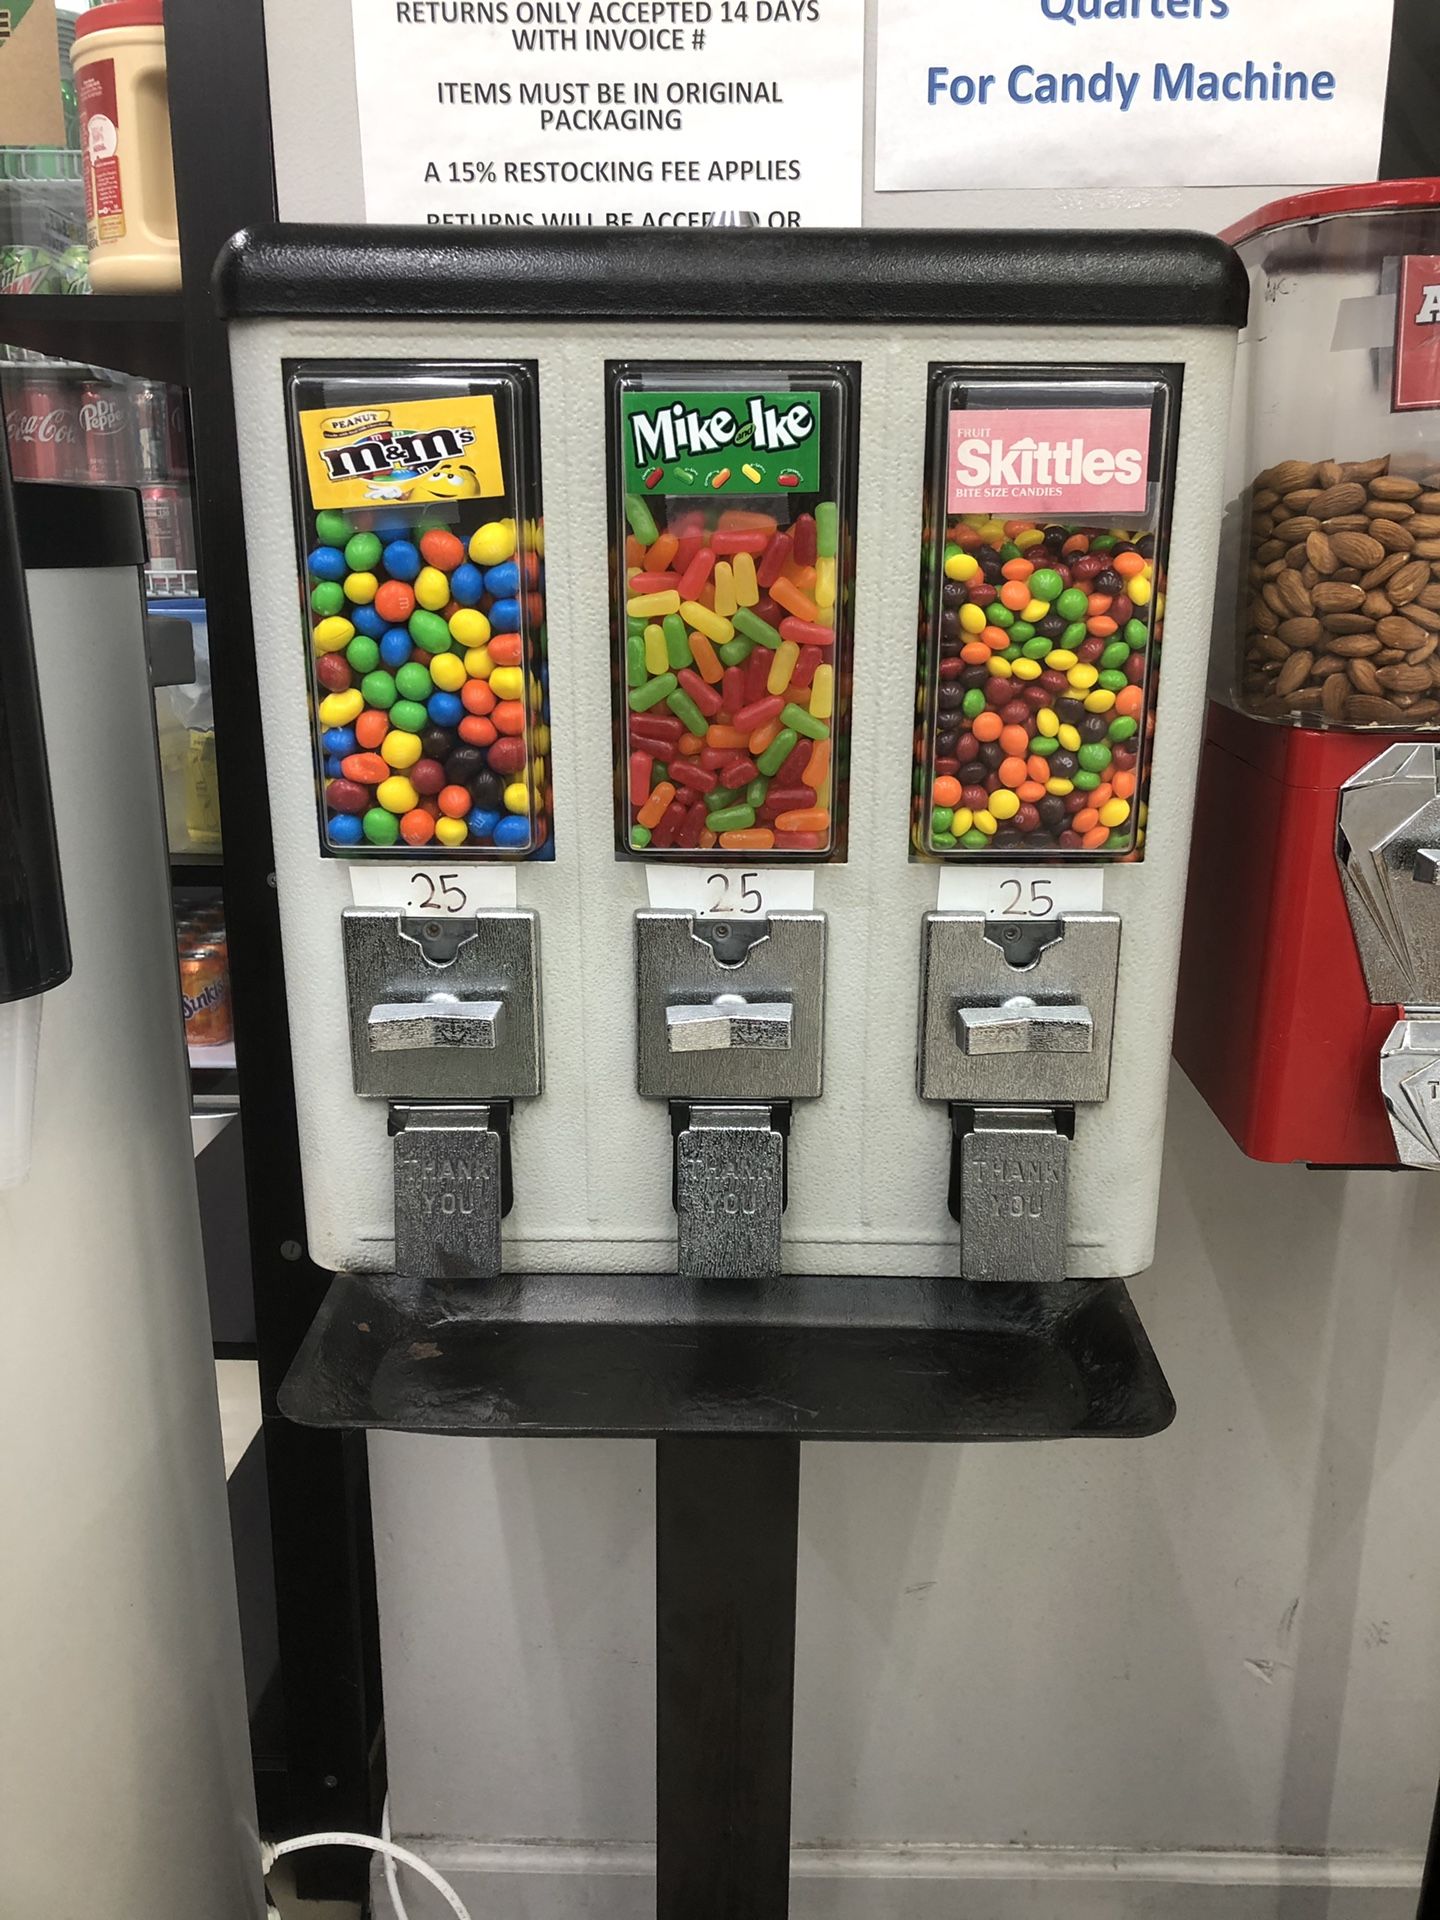 Candy machine for your business (I place it in)--> not for sale